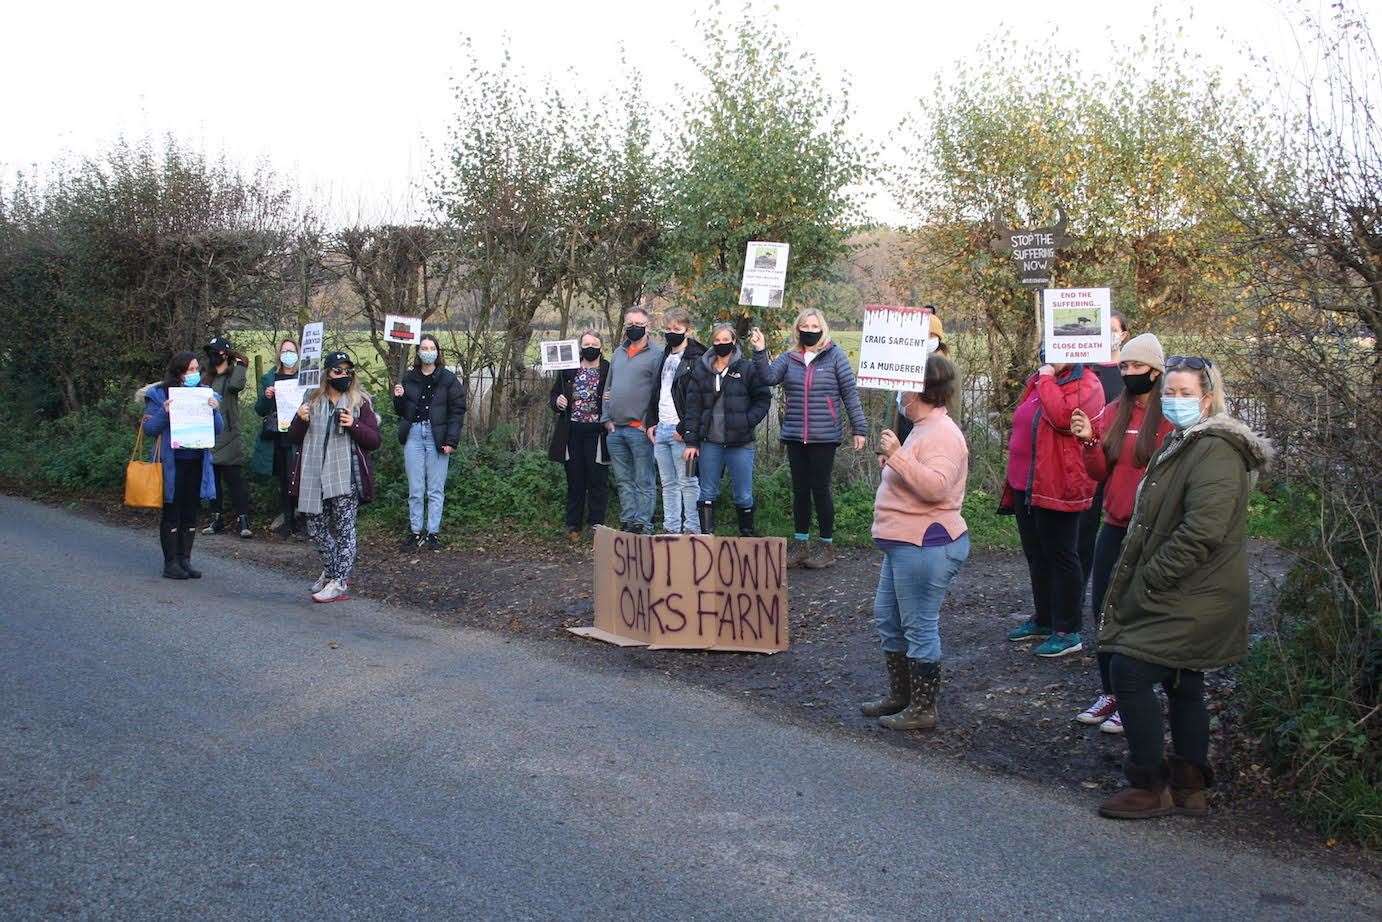 Protesters picketing Oaks Farm on a previous occasion